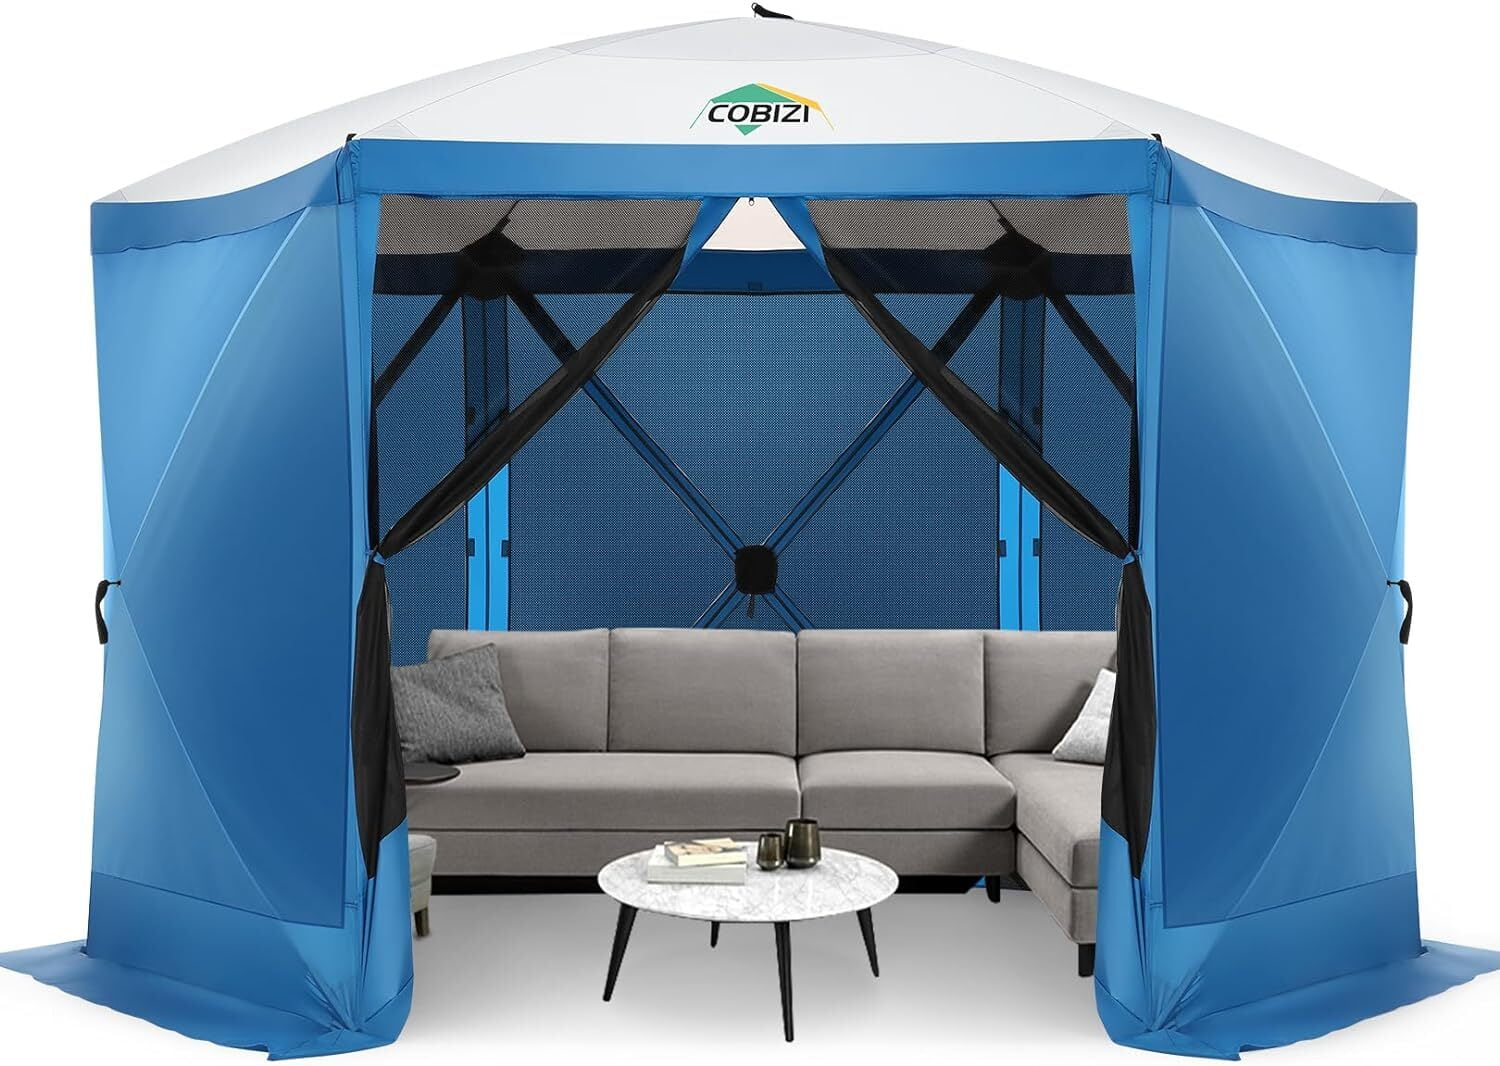 COBIZI 12'x12' Pop-up Gazebo Outdoor Camping Tent with 6 Sides